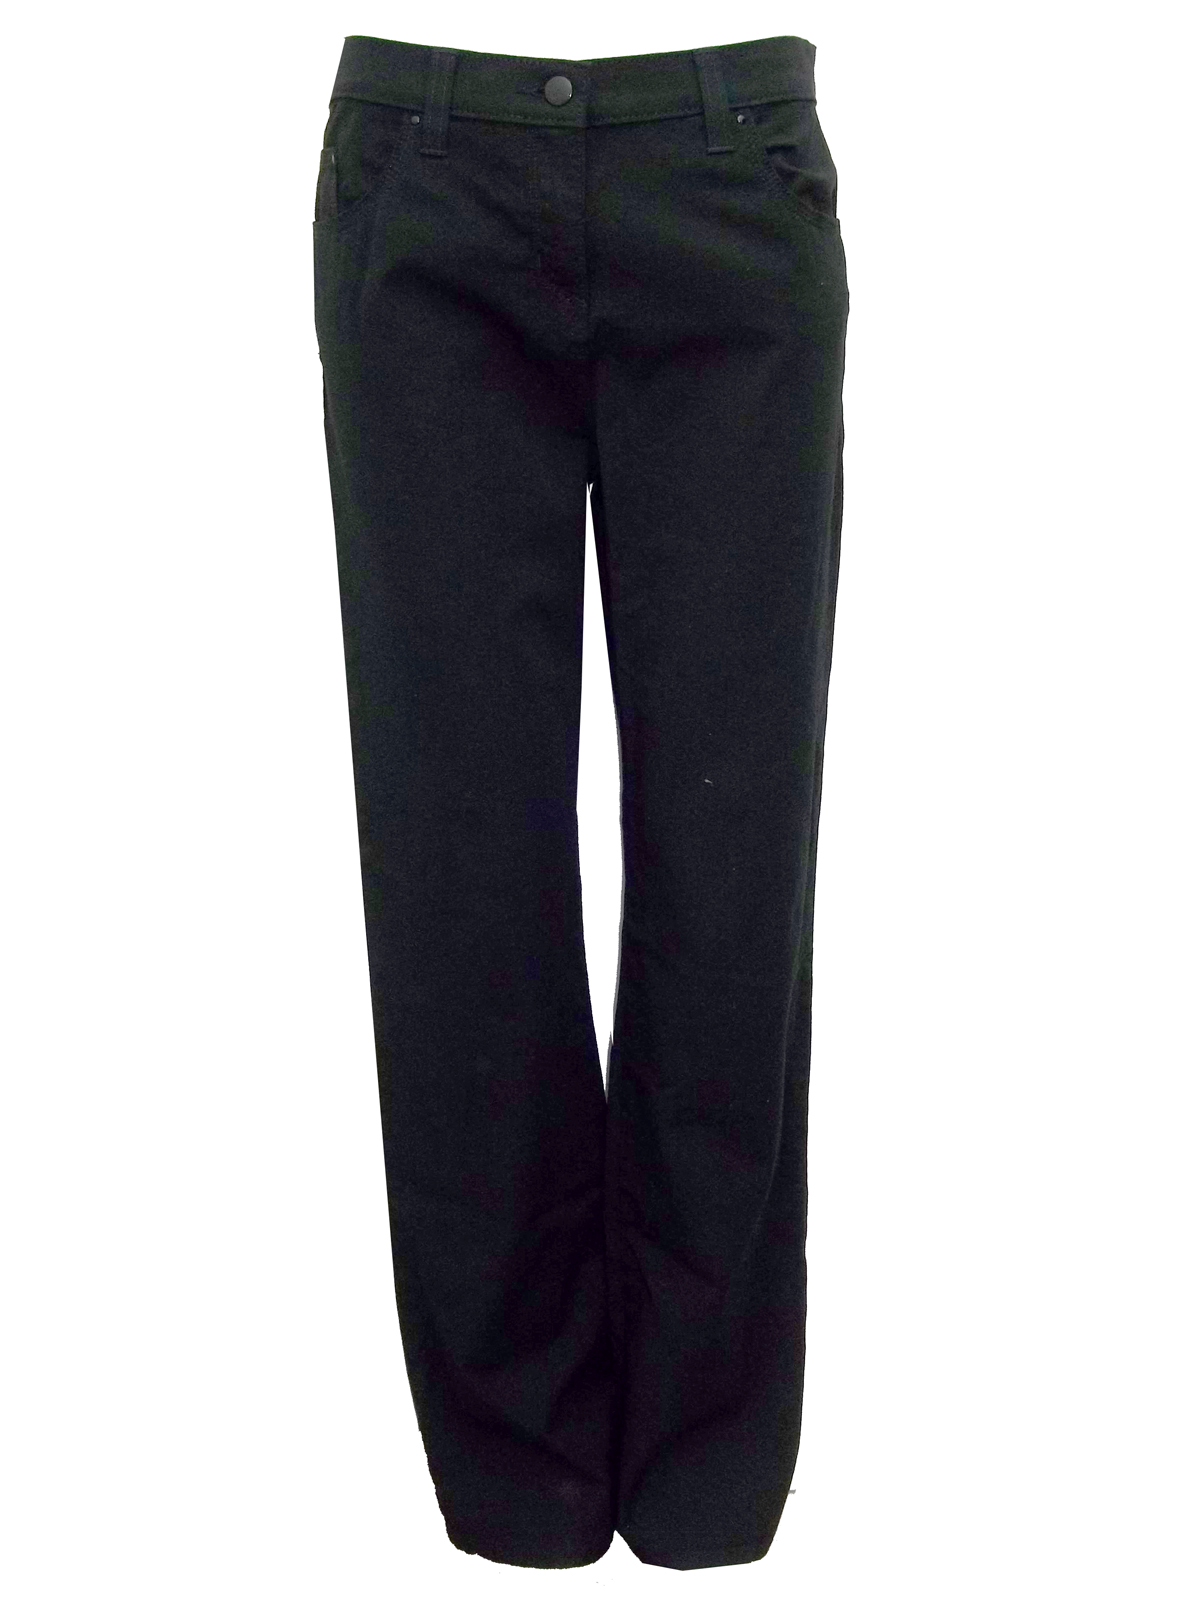 Marks and Spencer - - M&5 BLACK Cotton Rich Flat Front Trousers - Size 12